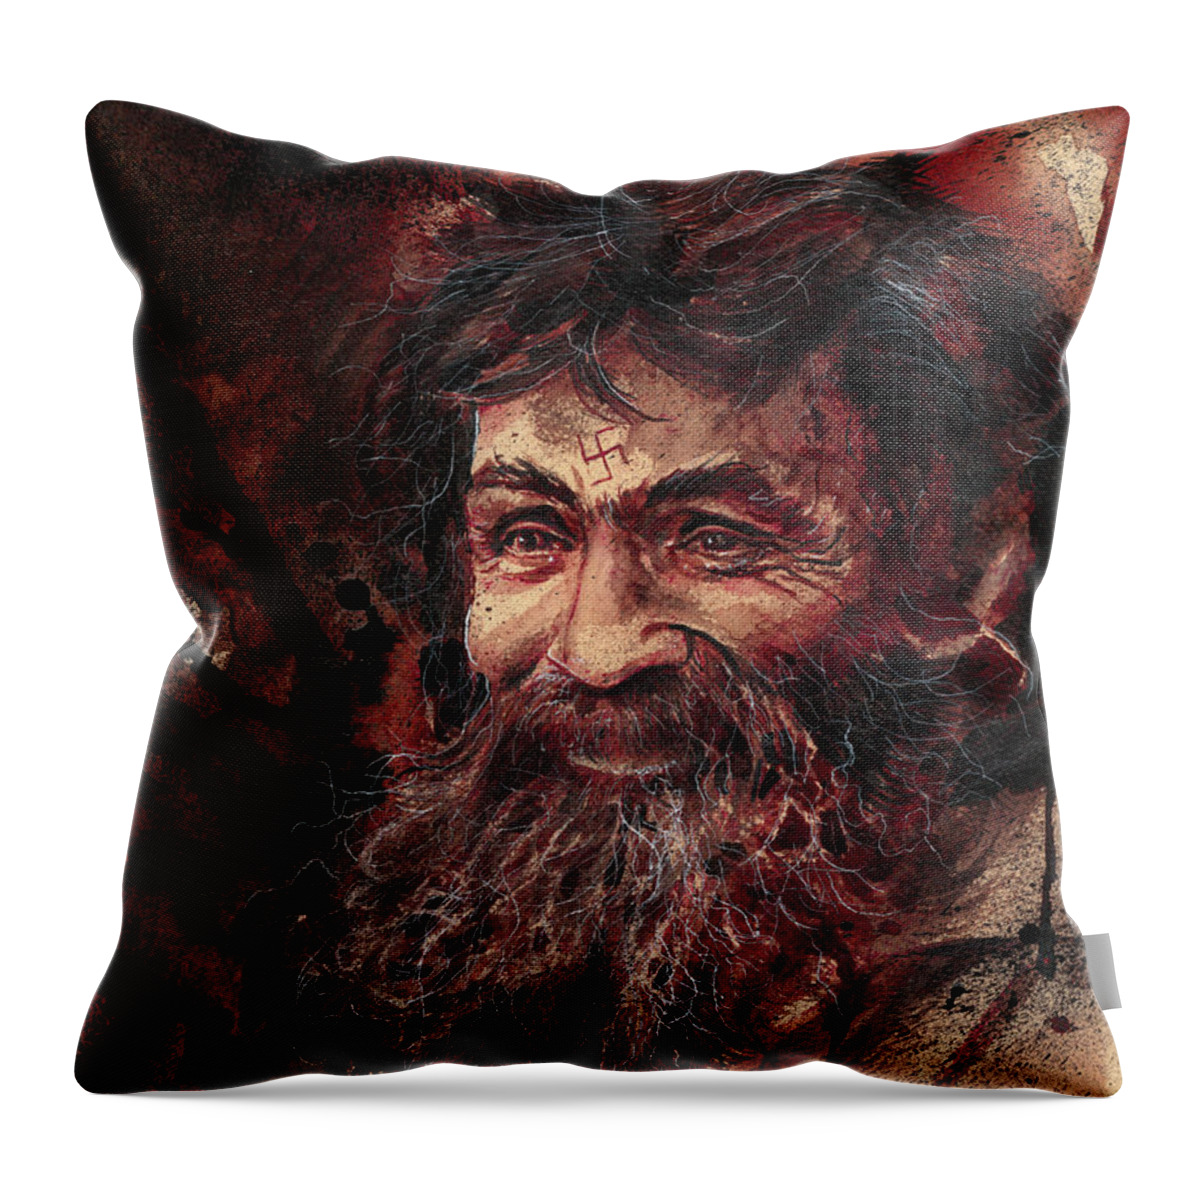 Ryan Almighty Throw Pillow featuring the painting CHARLES MANSON portrait dry blood by Ryan Almighty